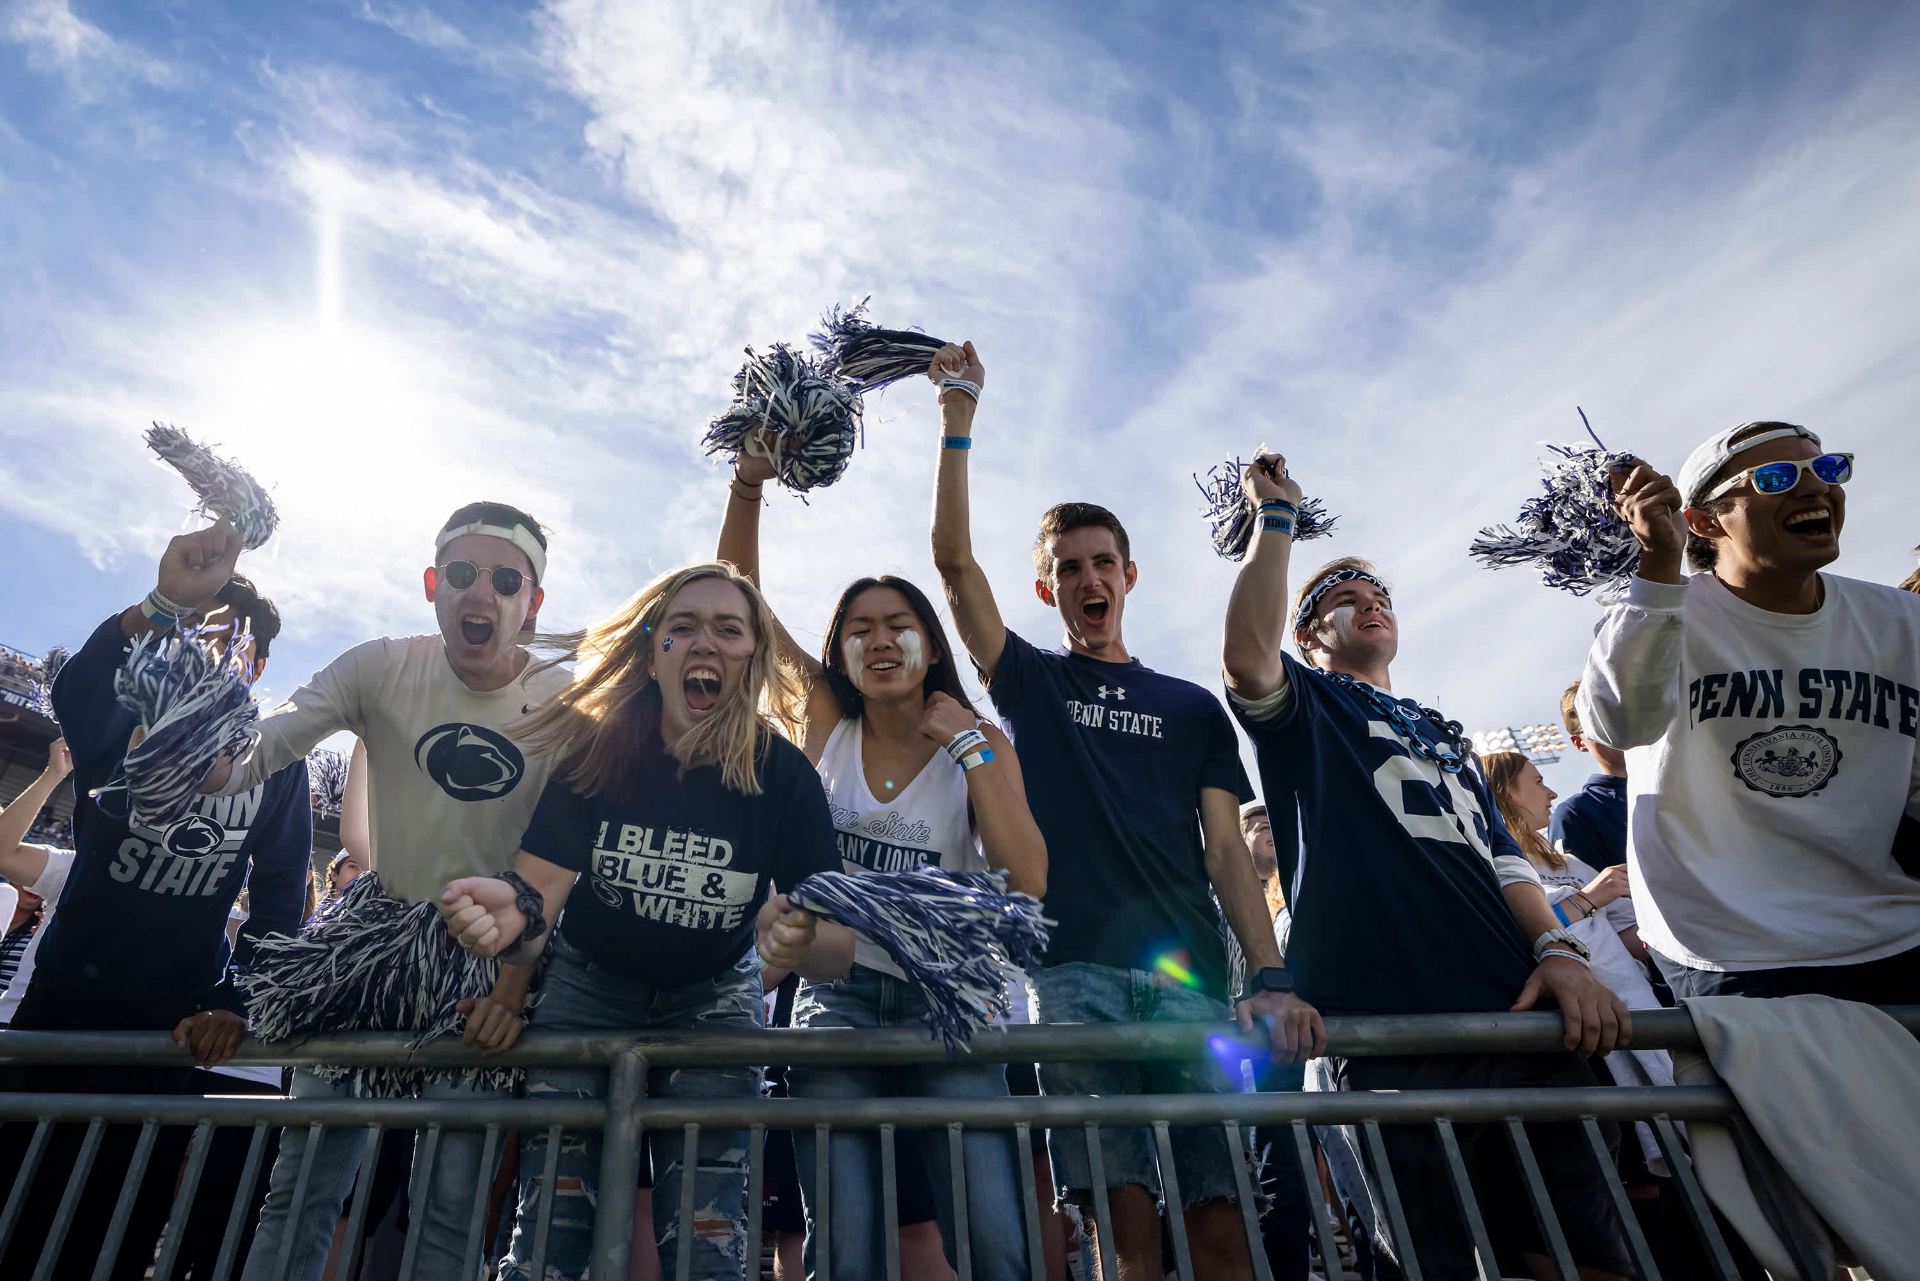 Penn State students cheering at an athletic event